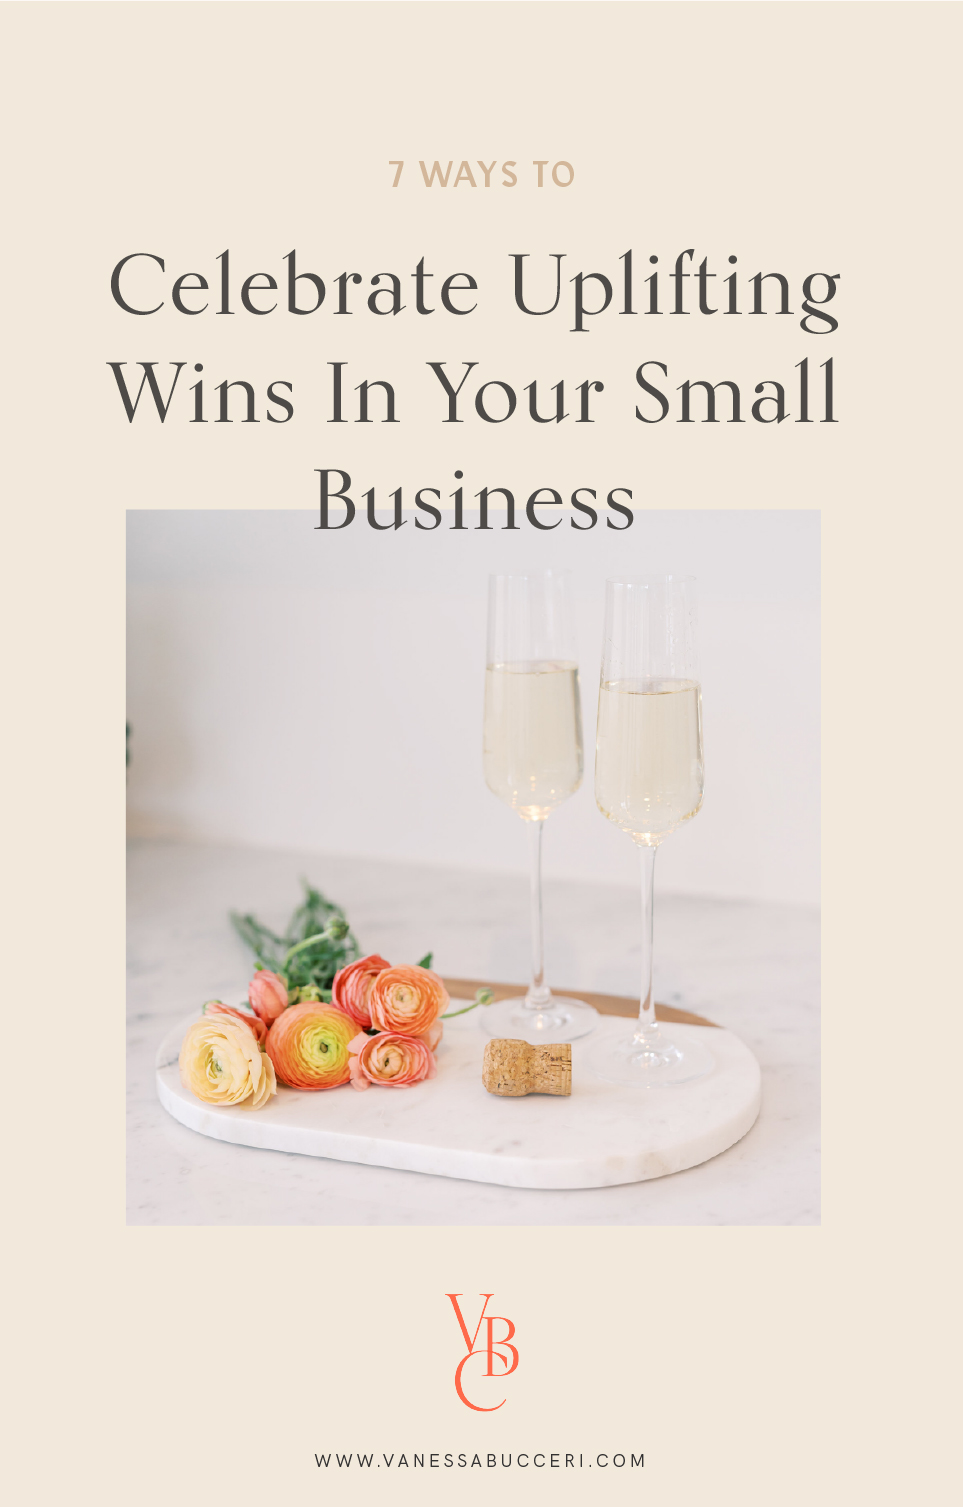 Ways to celebrate wins in your business including fresh flowers and champagne